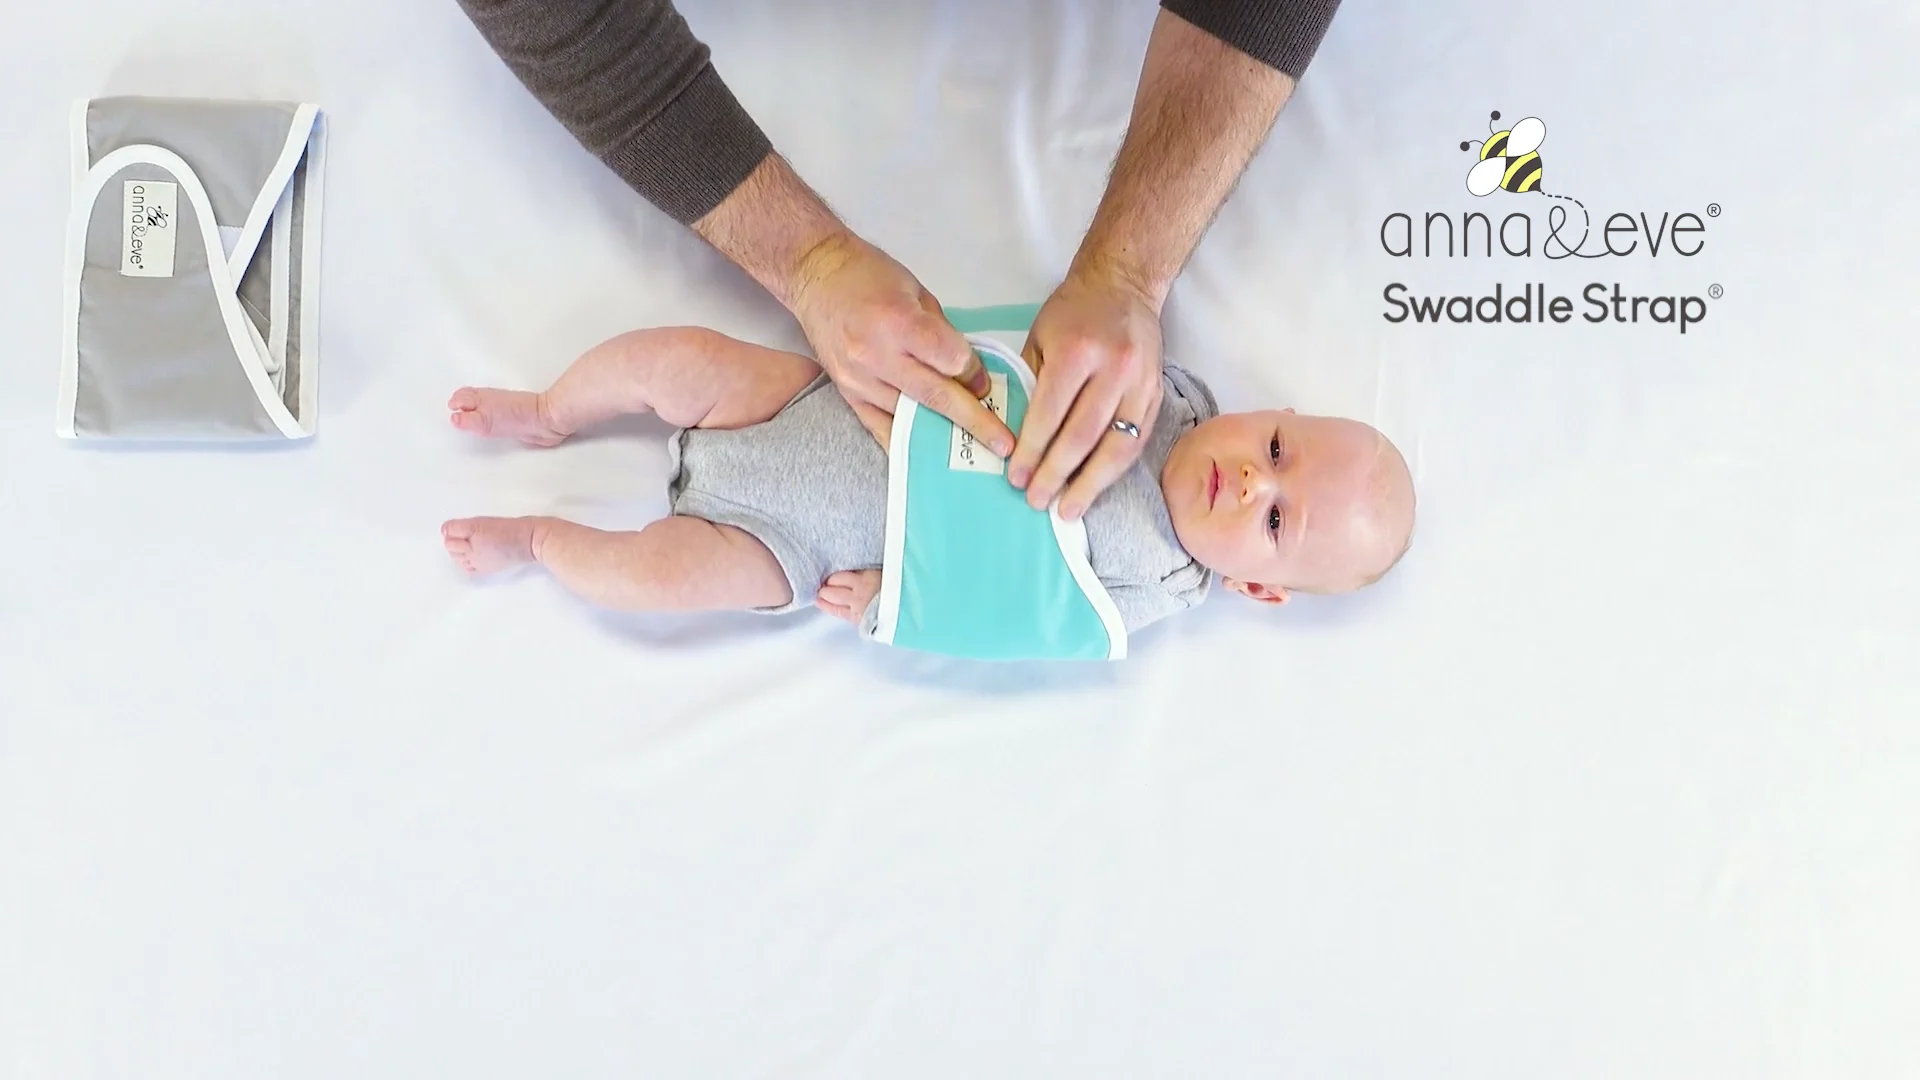 Anna & Eve Swaddle Strap